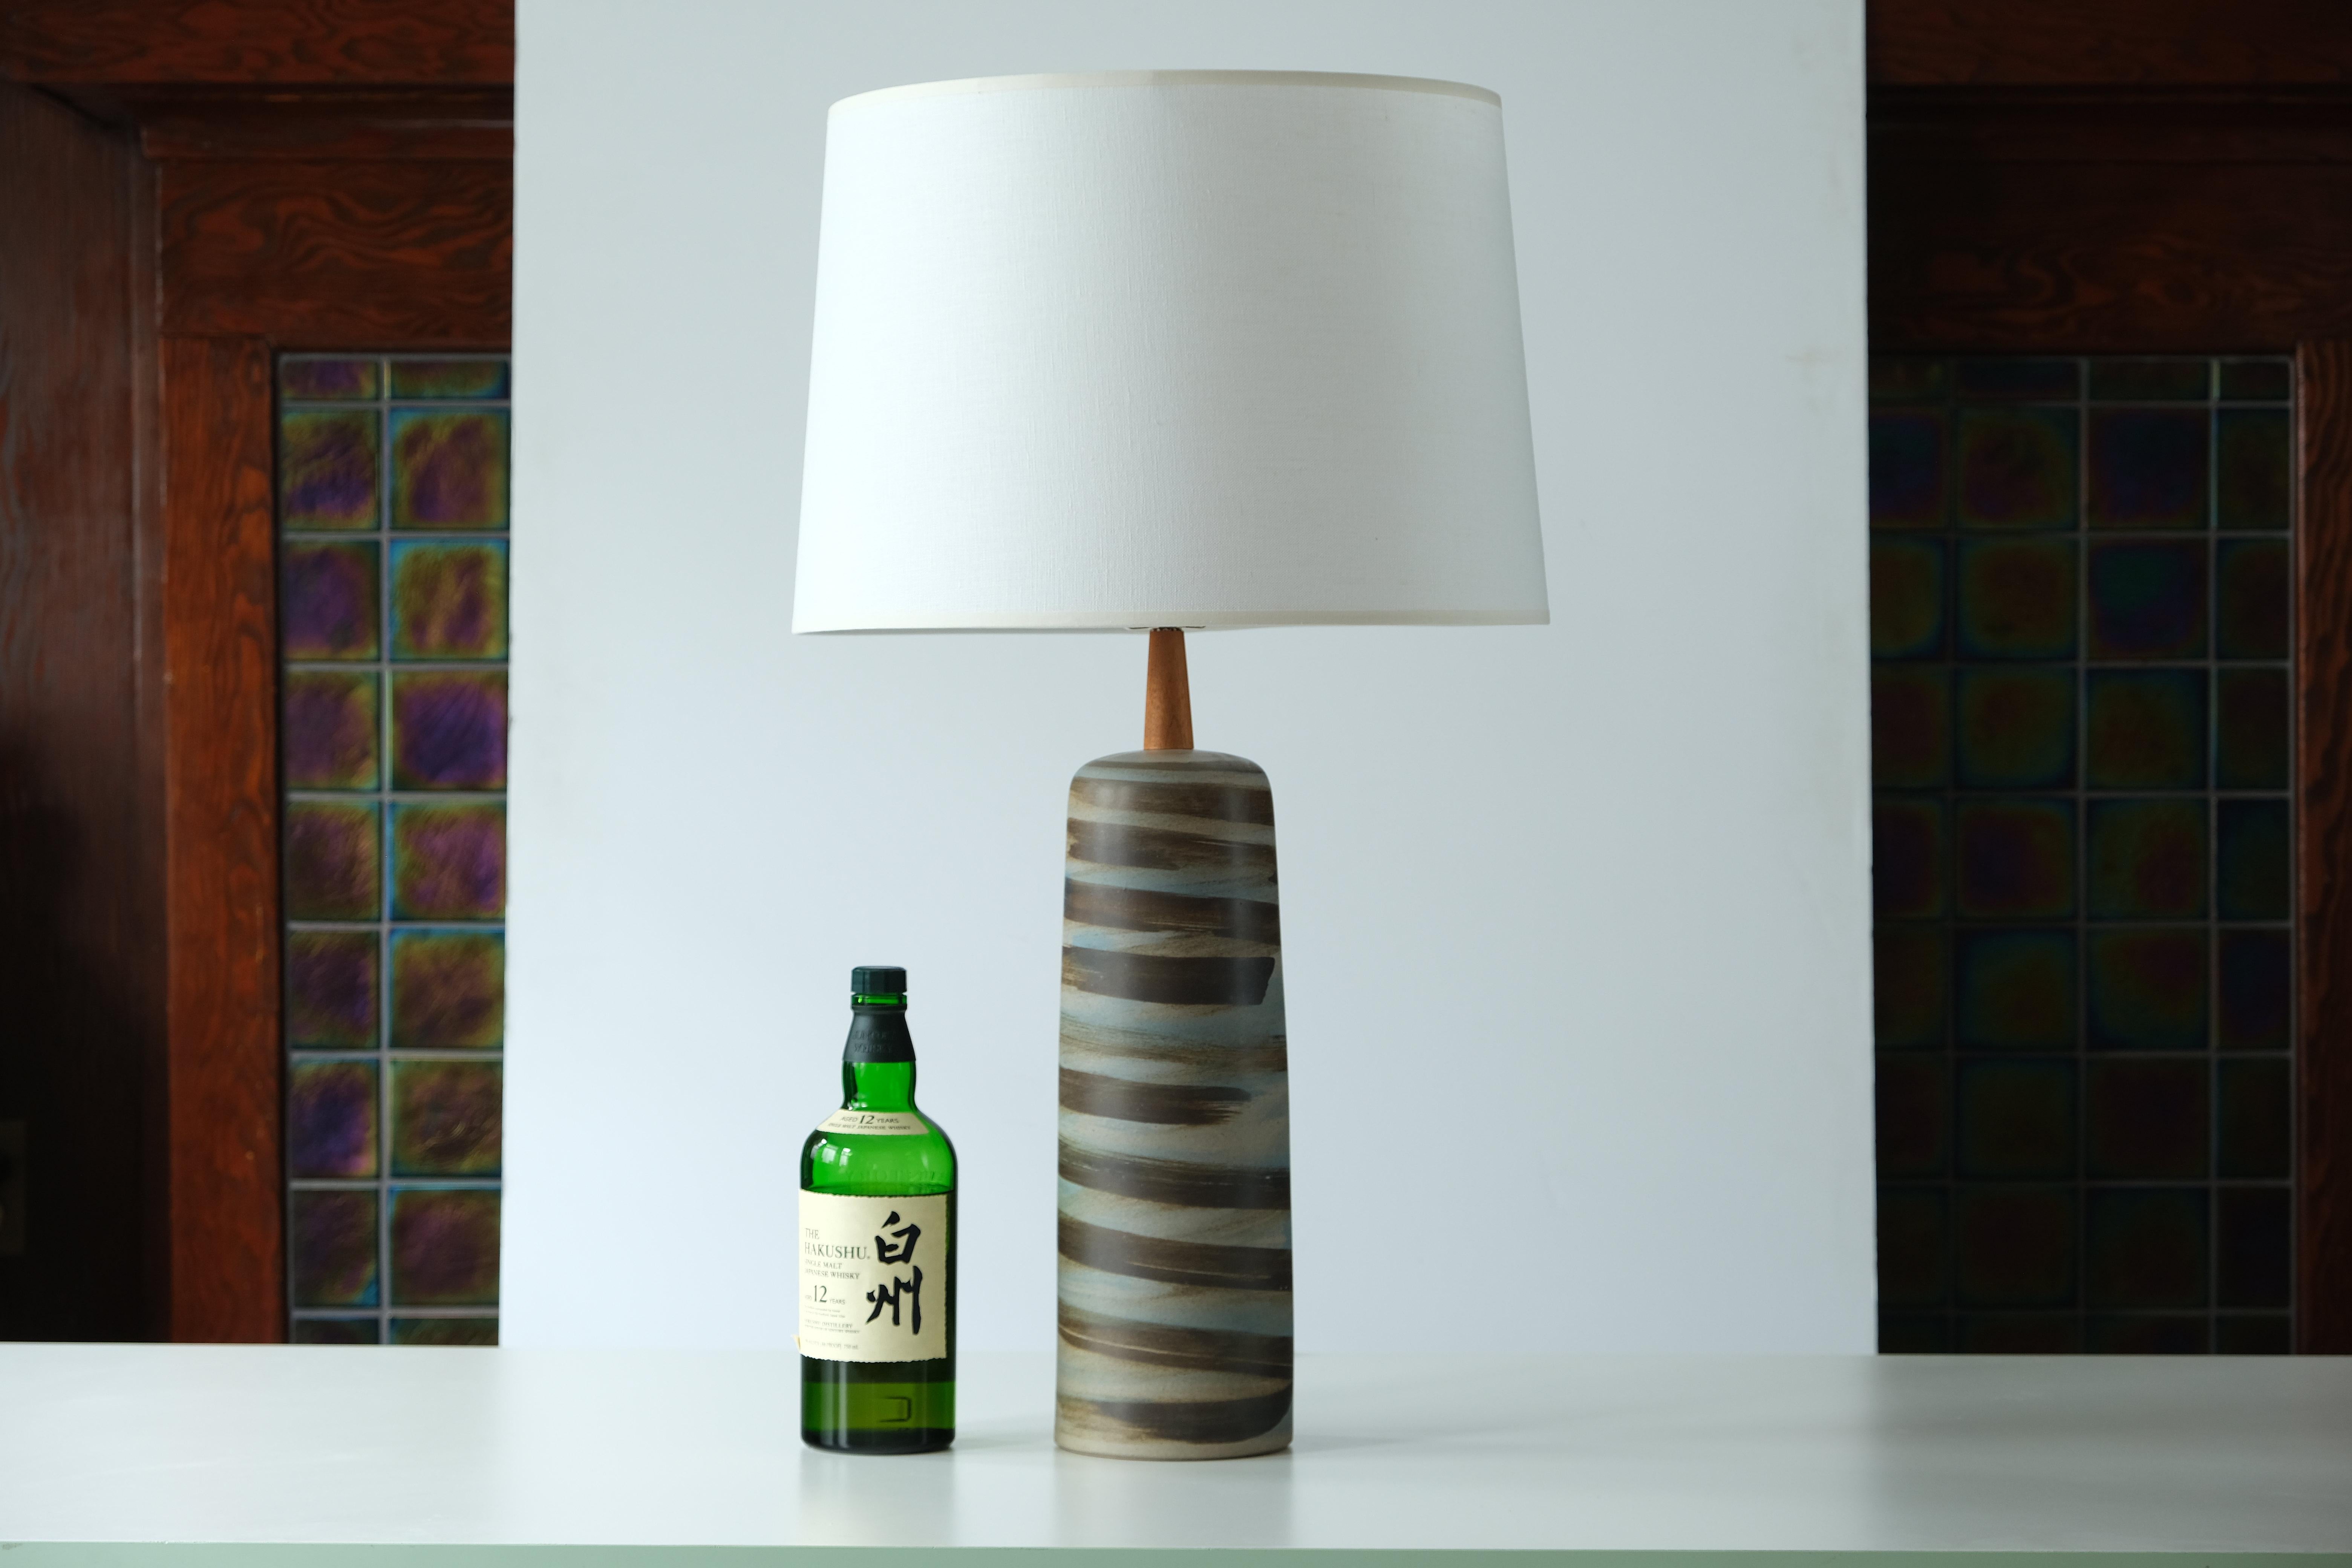 WHAT IS IT?
—
This signed Martz Model 41 lamp comes in a swirled brown and blue glaze. The tall ceramic body gives way to a thin, tapered walnut neck and the whole ensemble is capped off with a reproduction Martz walnut finial.

This model of lamp